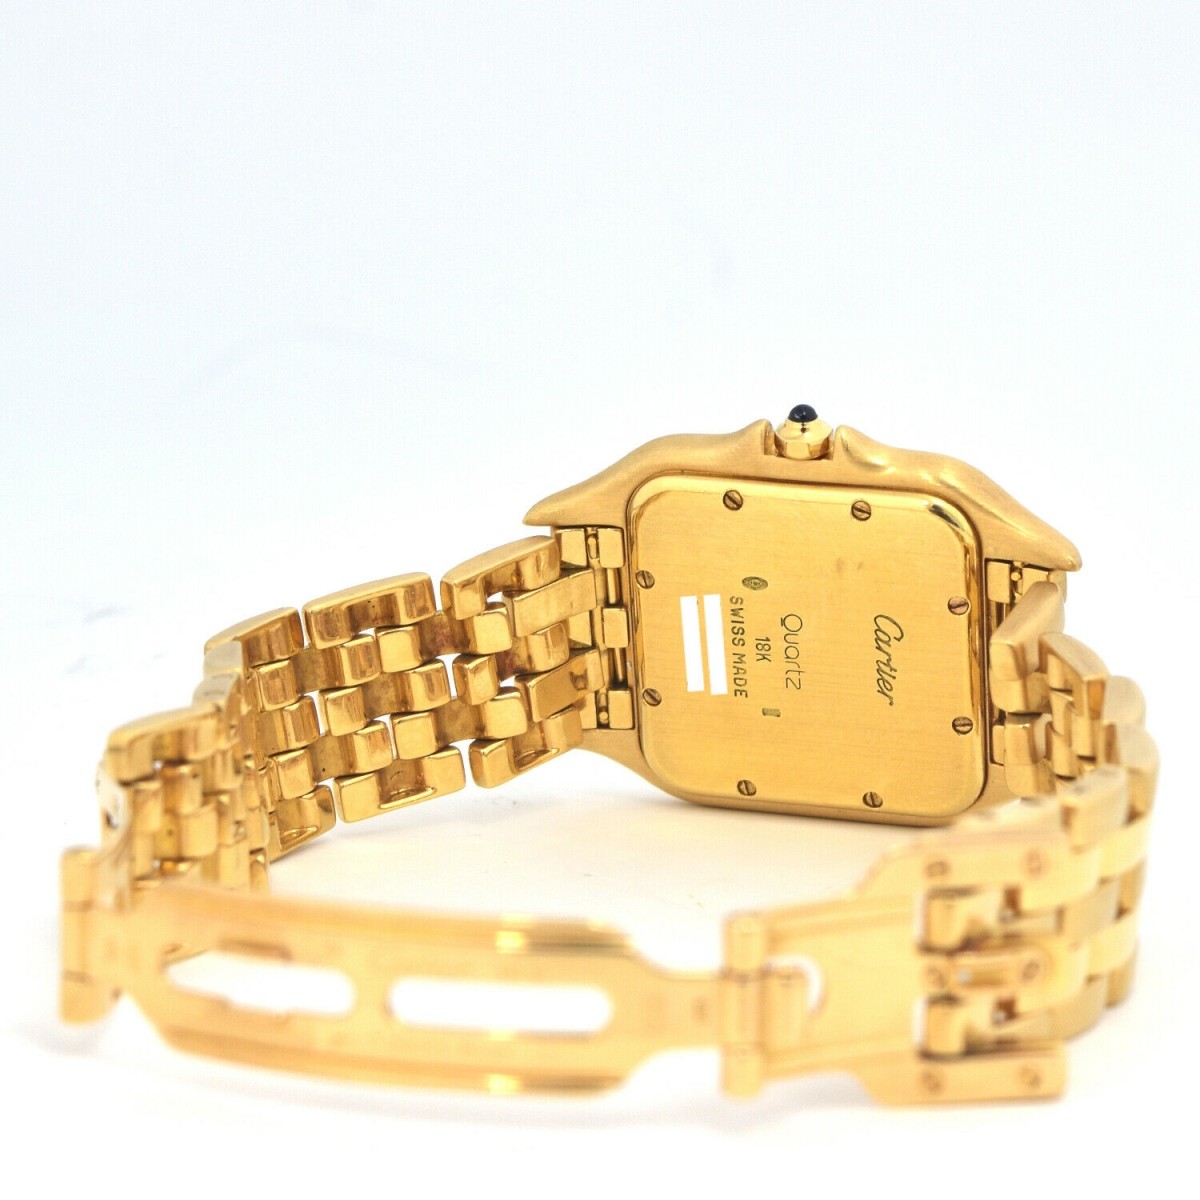 Lady's Cartier Panthere 18K Watch